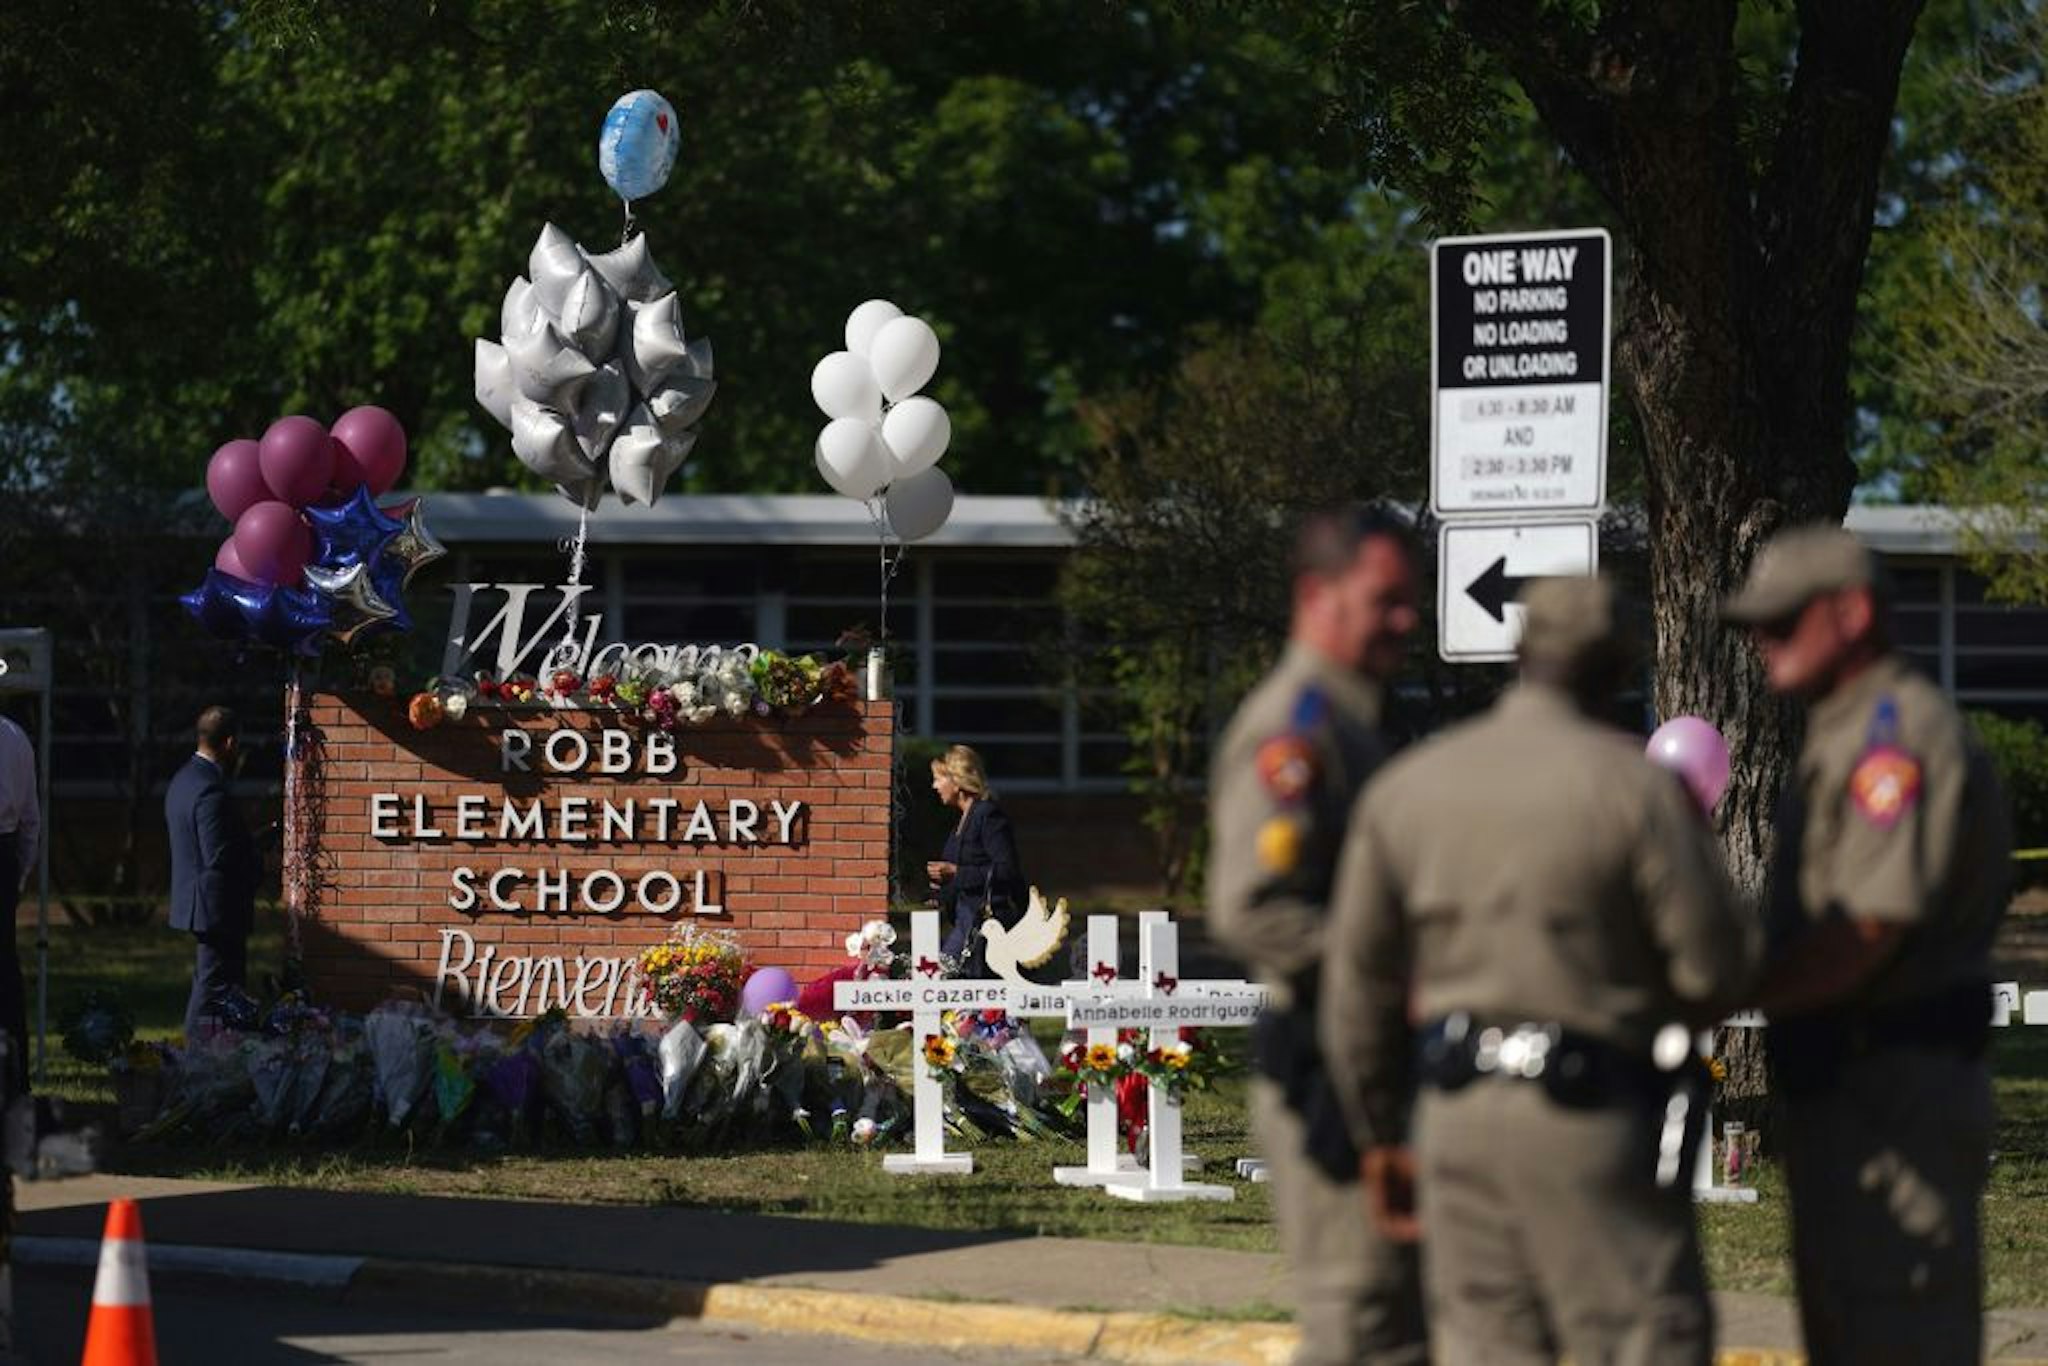 Police officers stand next to a makeshift memorial outside the Robb Elementary School on May 26, 2022 in Uvalde, Texas. - Grief at the massacre of 19 children at the elementary school in Texas spilled into confrontation on May 25, as angry questions mounted over gun control -- and whether this latest tragedy could have been prevented. The tight-knit Latino community of Uvalde on May 24 became the site of the worst school shooting in a decade, committed by a disturbed 18-year-old armed with a legally bought assault rifle. (Photo by allison dinner / AFP) (Photo by ALLISON DINNER/AFP via Getty Images)